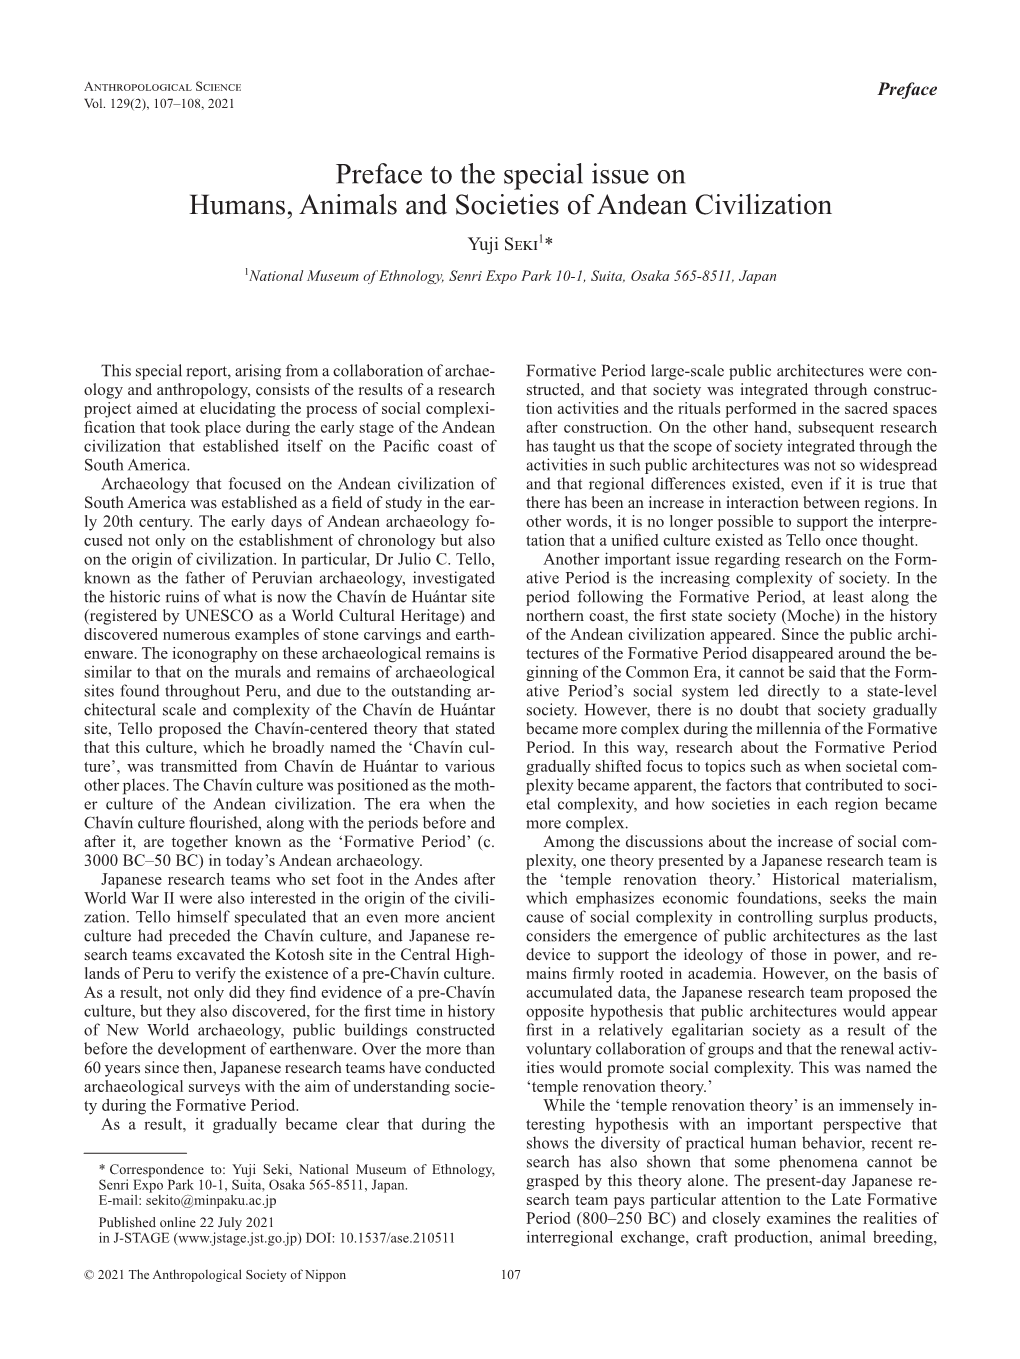 Preface to the Special Issue on Humans, Animals and Societies of Andean Civilization